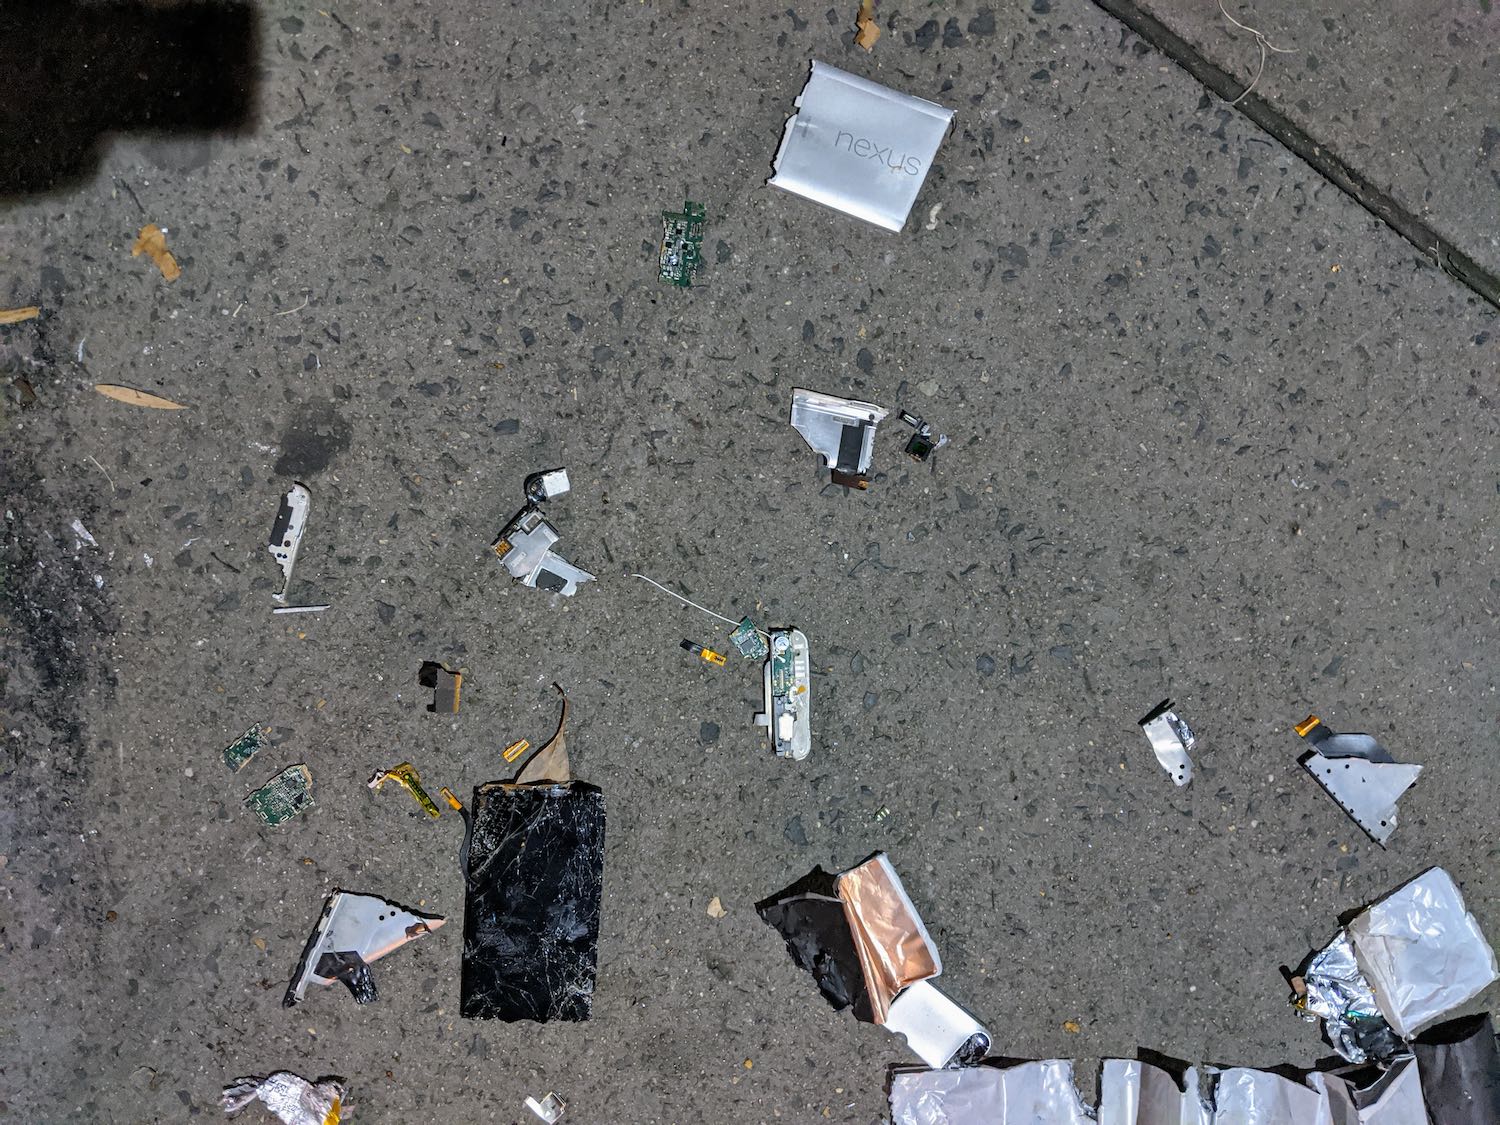 A Nexus 6P phone lays smashed to smithereens on a concrete pavement. Green pieces of electronic component board are smashed up and scattered around. The phone screen appears more like the surface of a cheese grater.